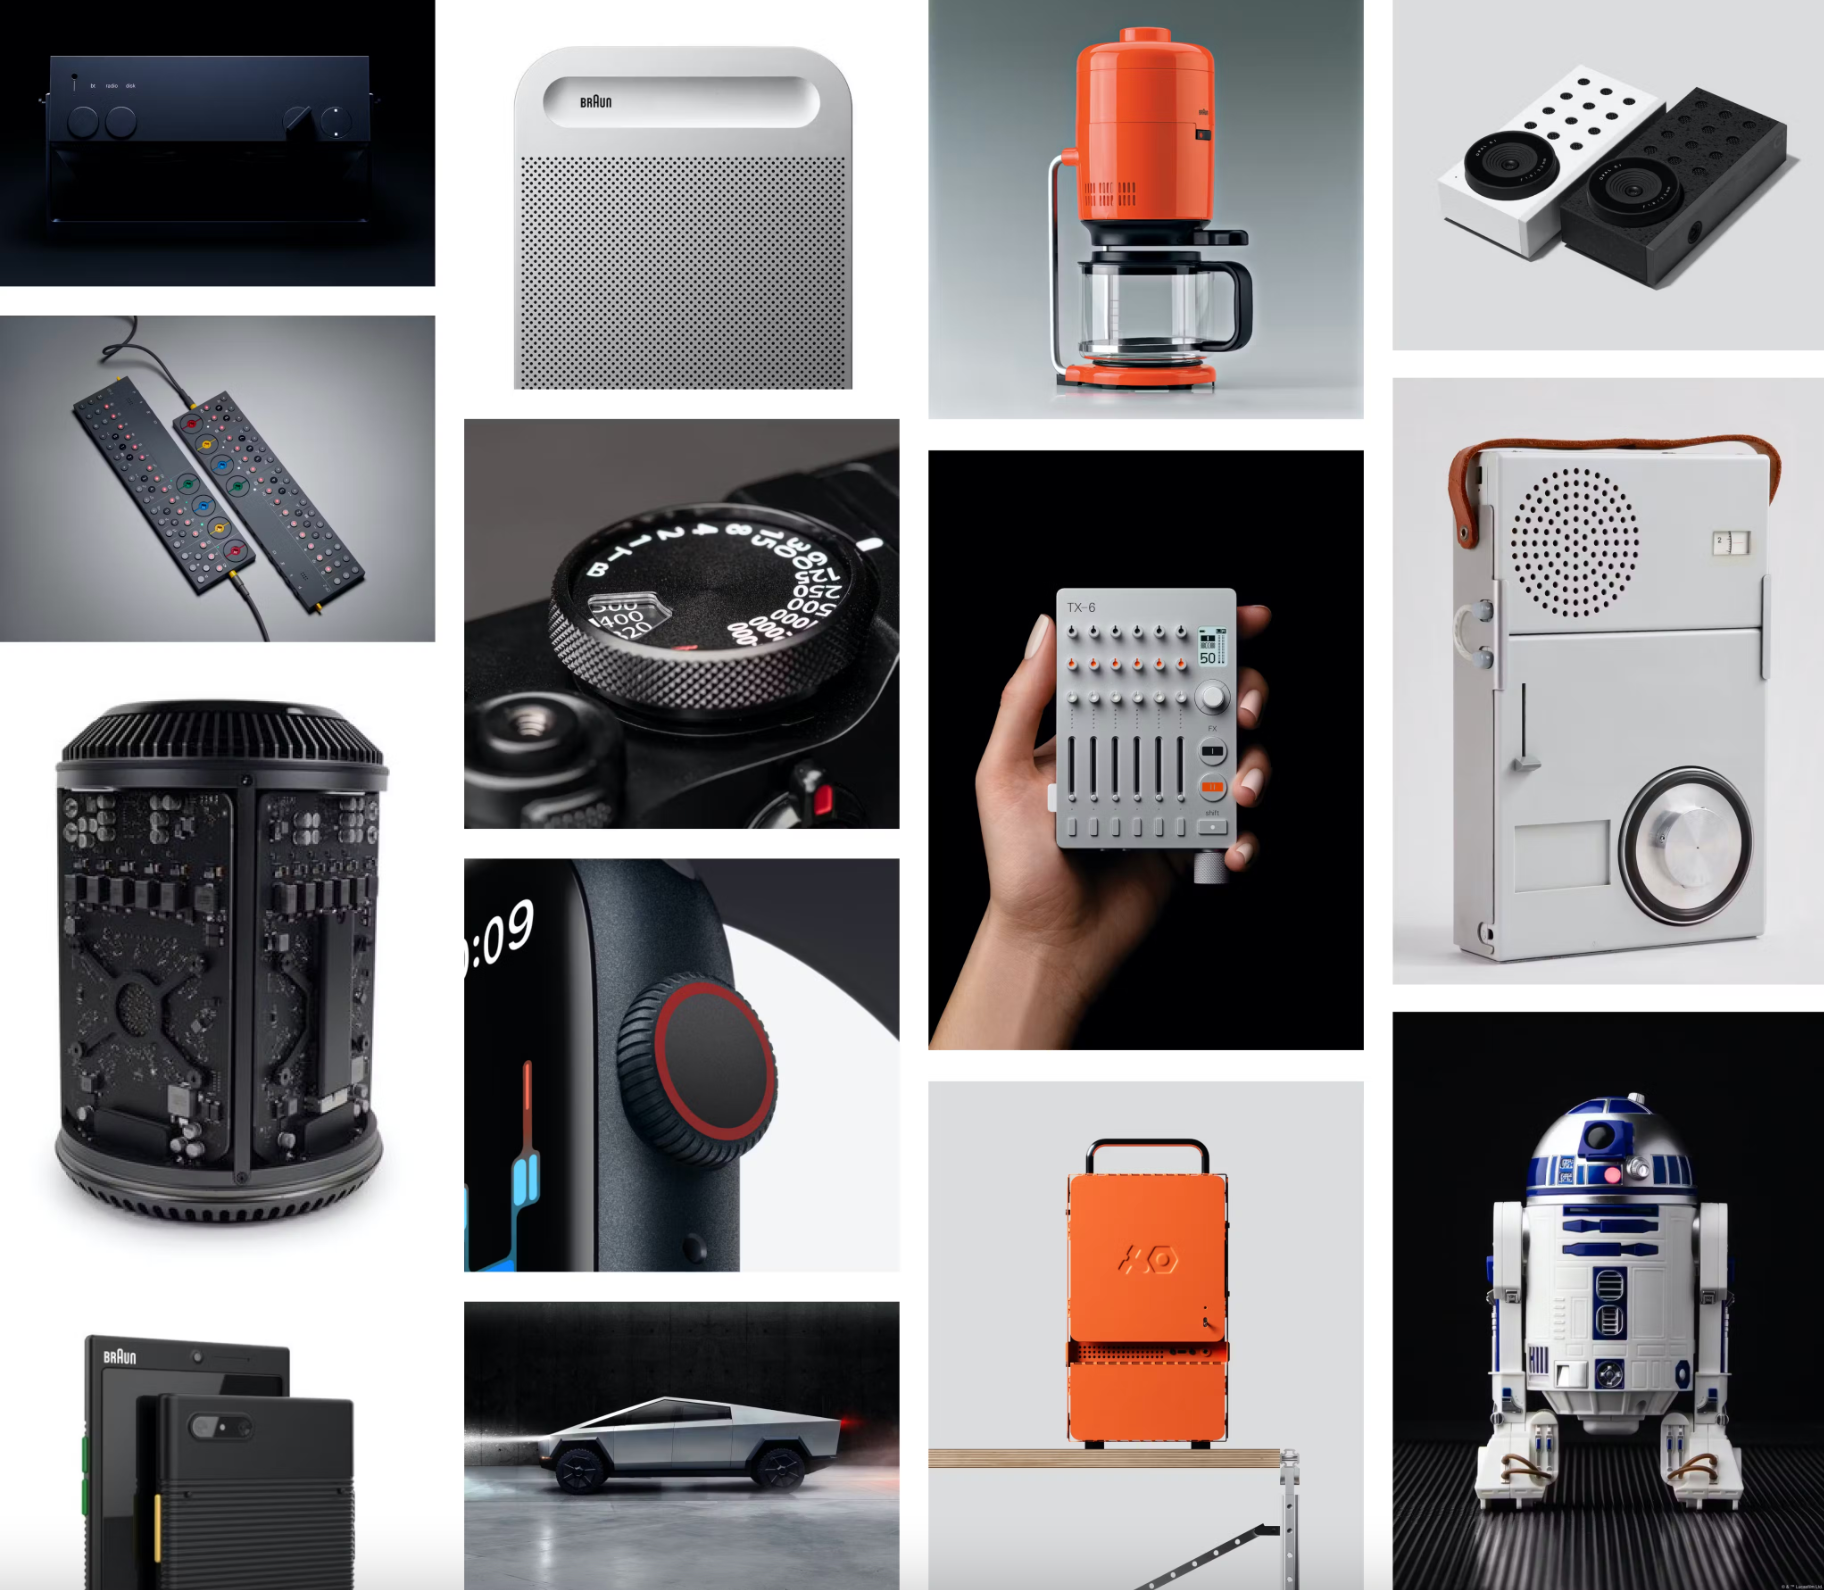 Mosaic photo of industrial design products